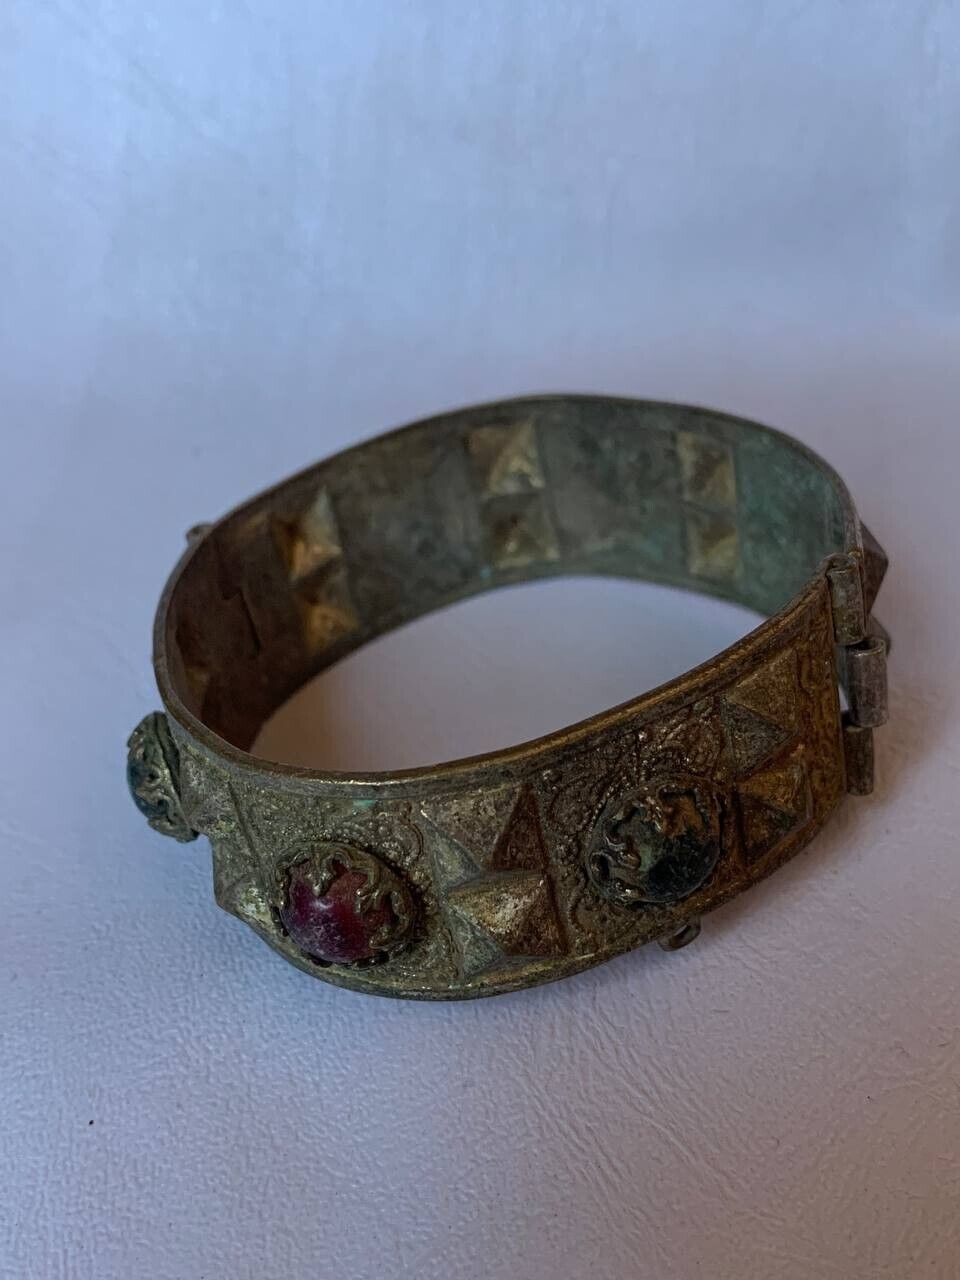 EXTREMELY VERY STUNNING RARE ANCIENT ROMAN BRACELET ENGRAVING BRONZE AUTHENTIC